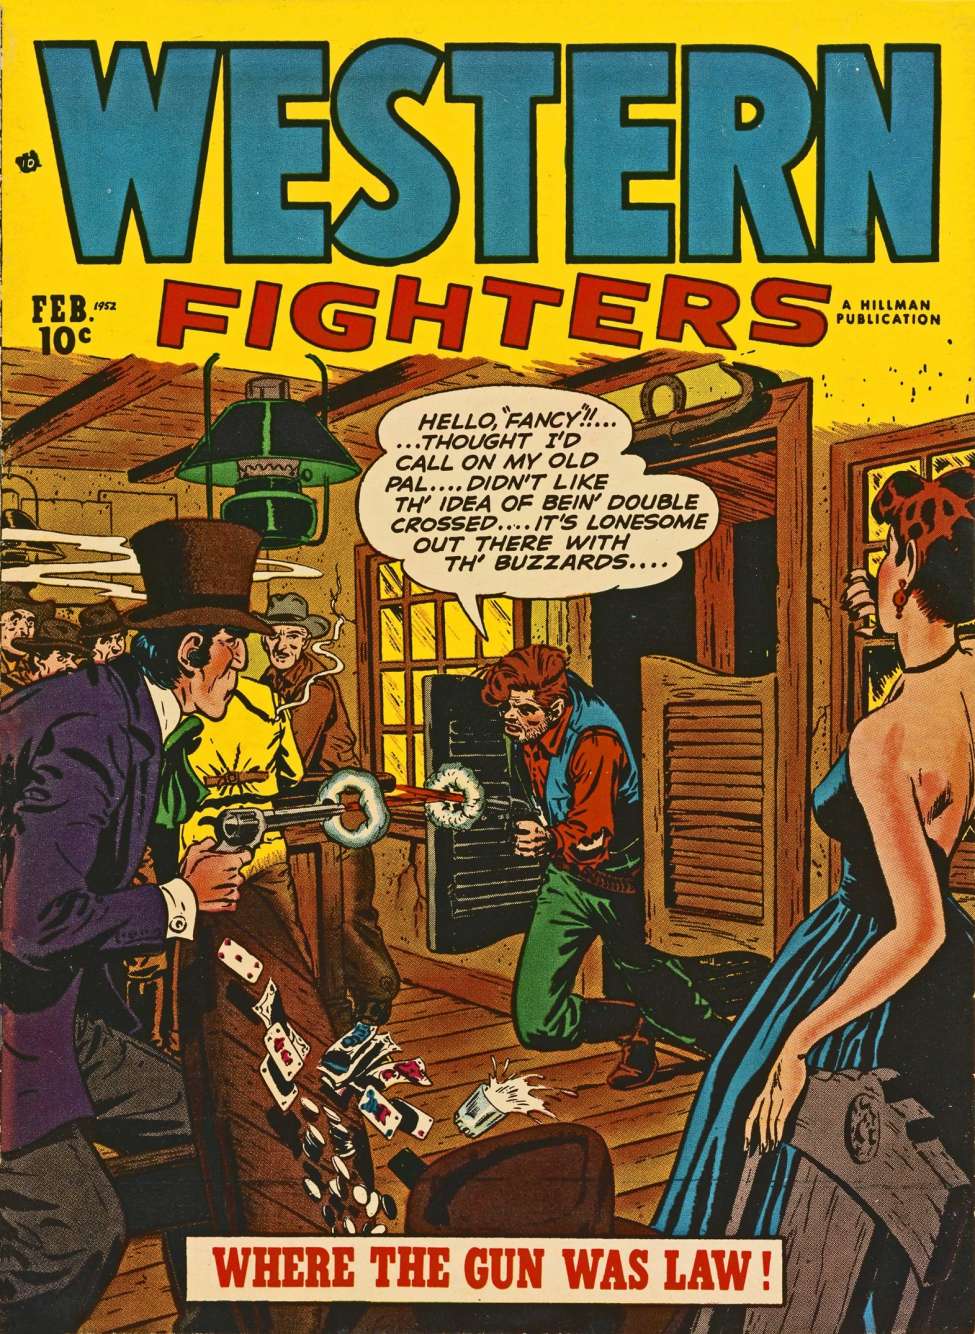 Comic Book Cover For Western Fighters v4 3 - Version 2